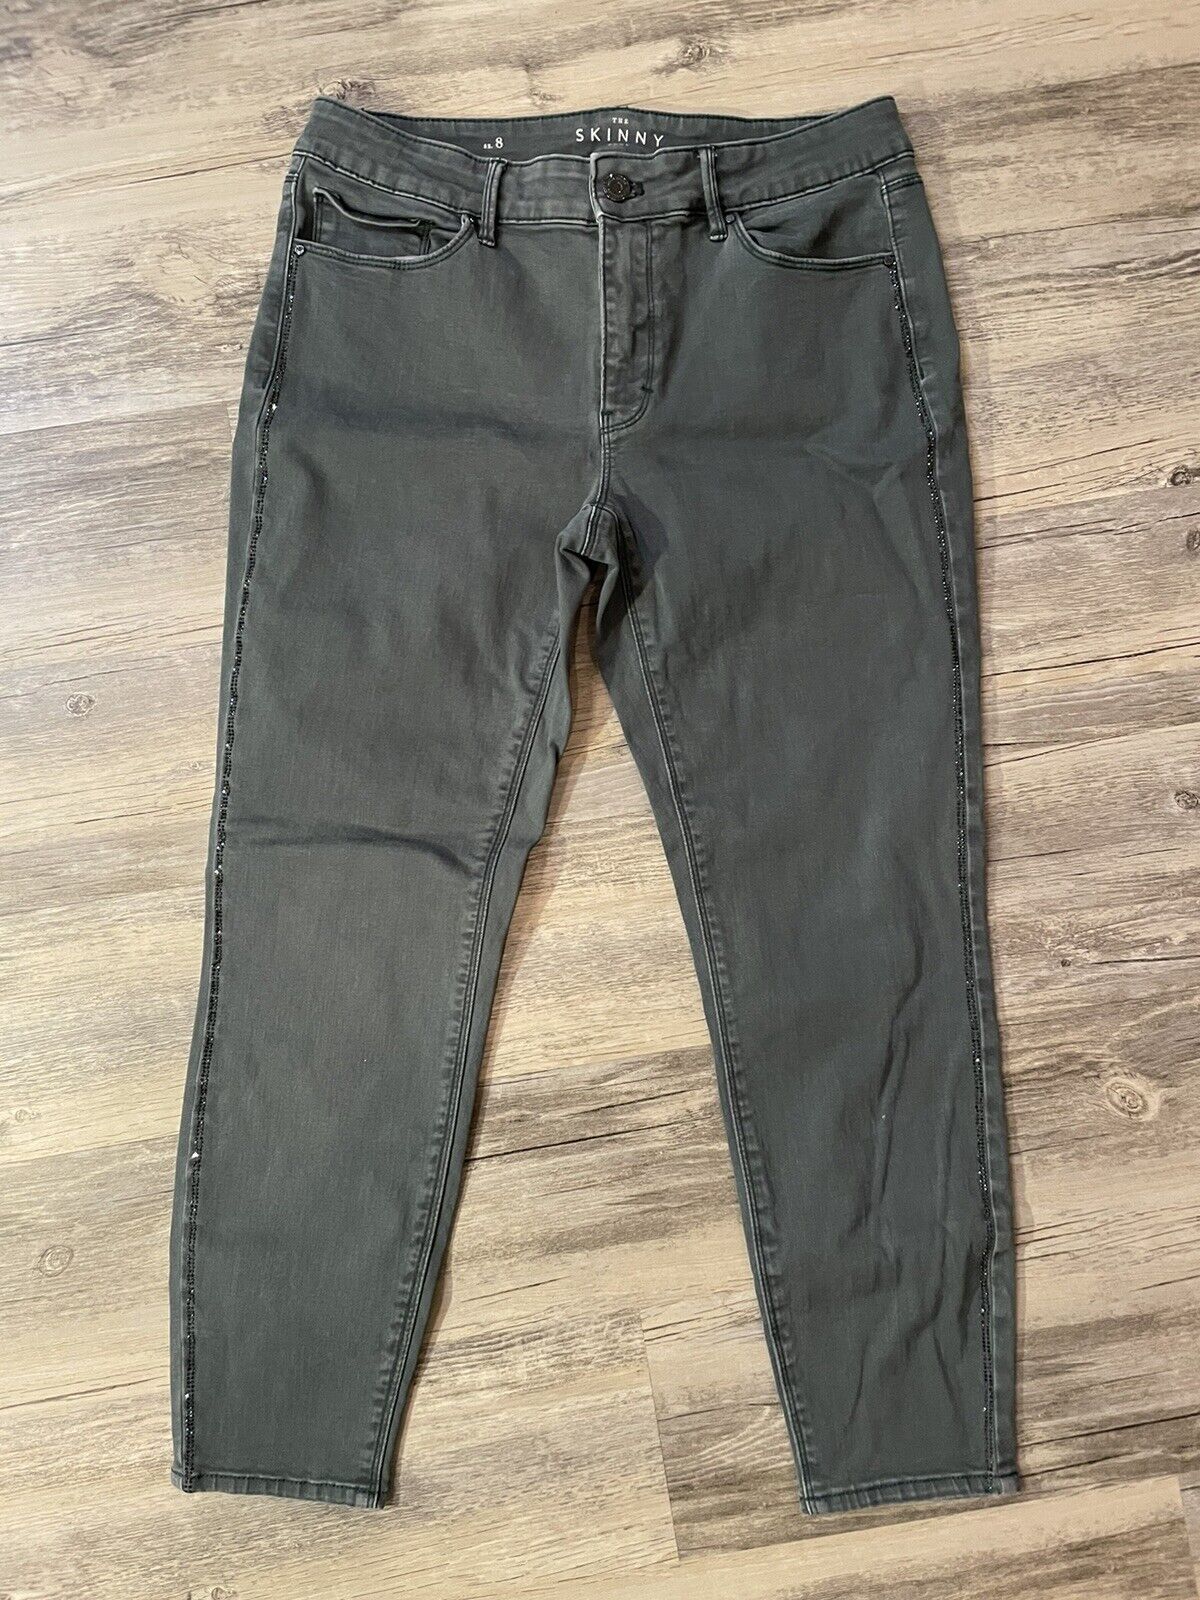 Primary image for White House Black Market The Skinny Crop Jeans Size 8 Designer Bling 30x25